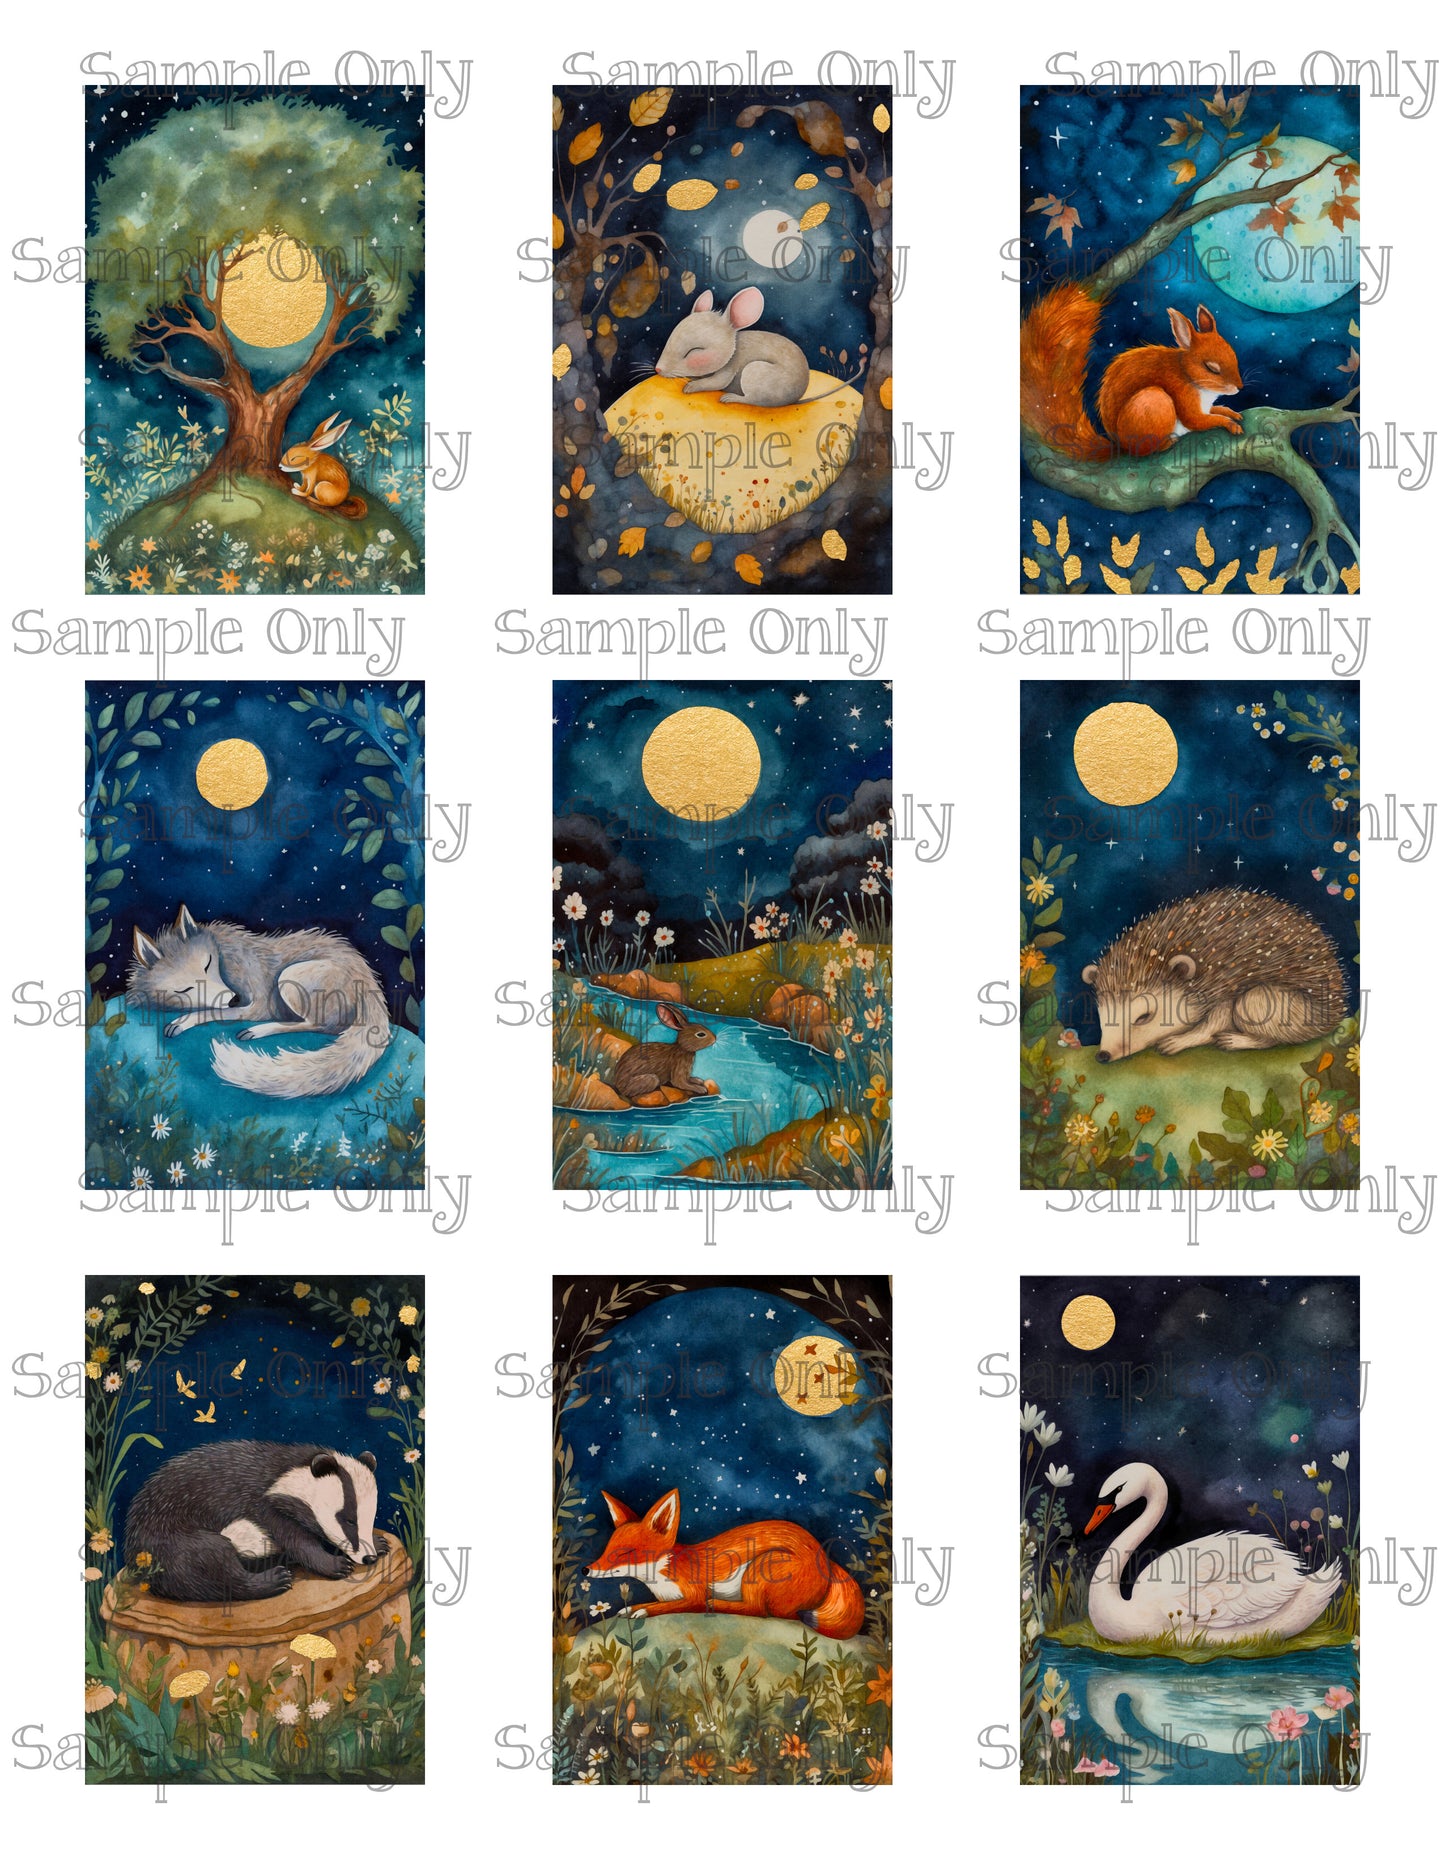 2x3 Inch Sleeping Animals Image Sheet For Polymer Clay Transfer Decal DIGITAL FILE OR PRINTED